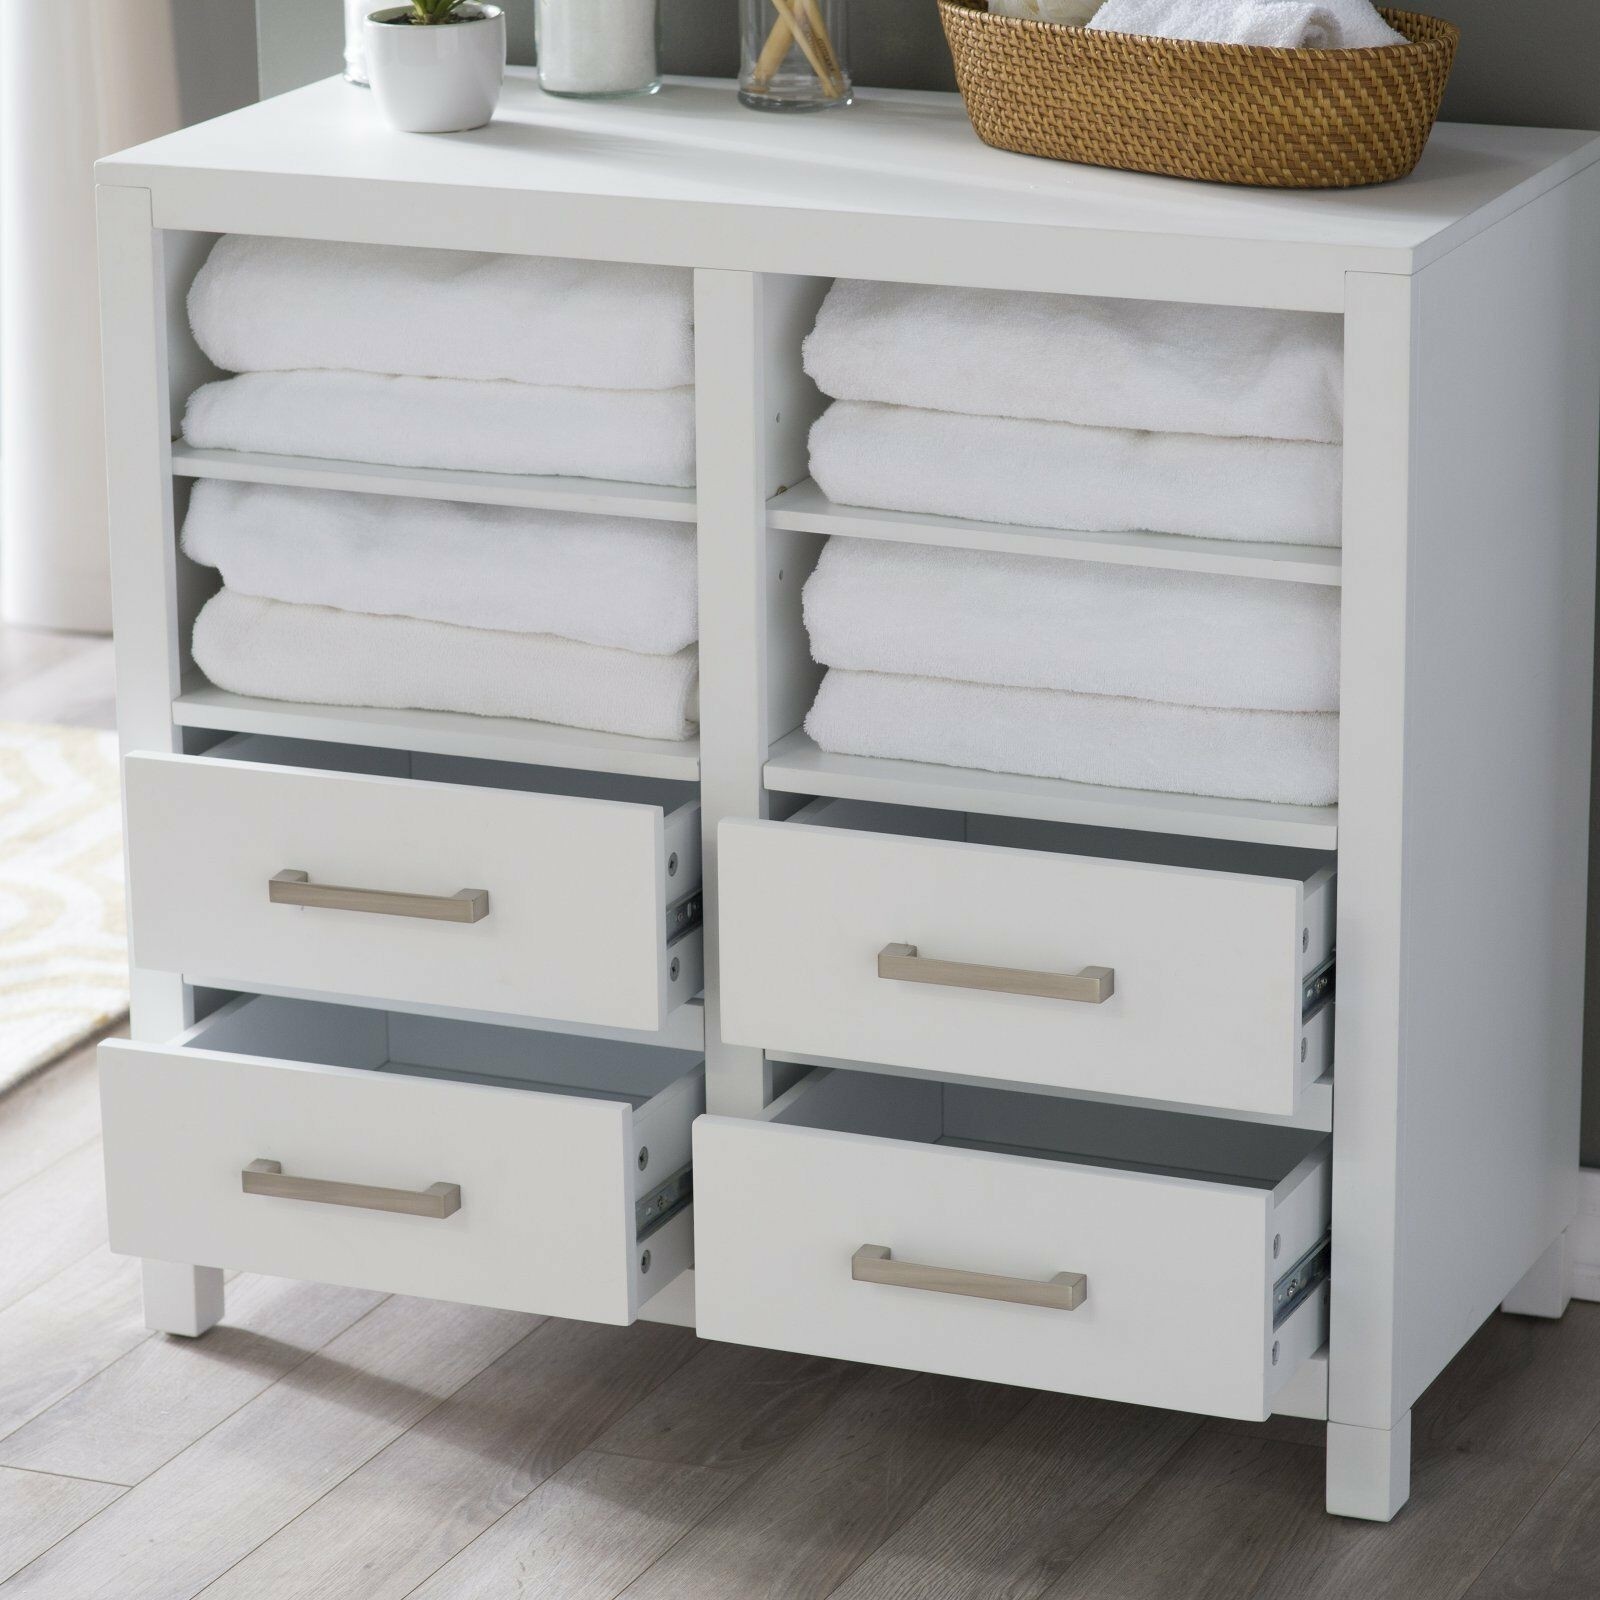 Classic white freestanding bathroom storage cabinet for 1